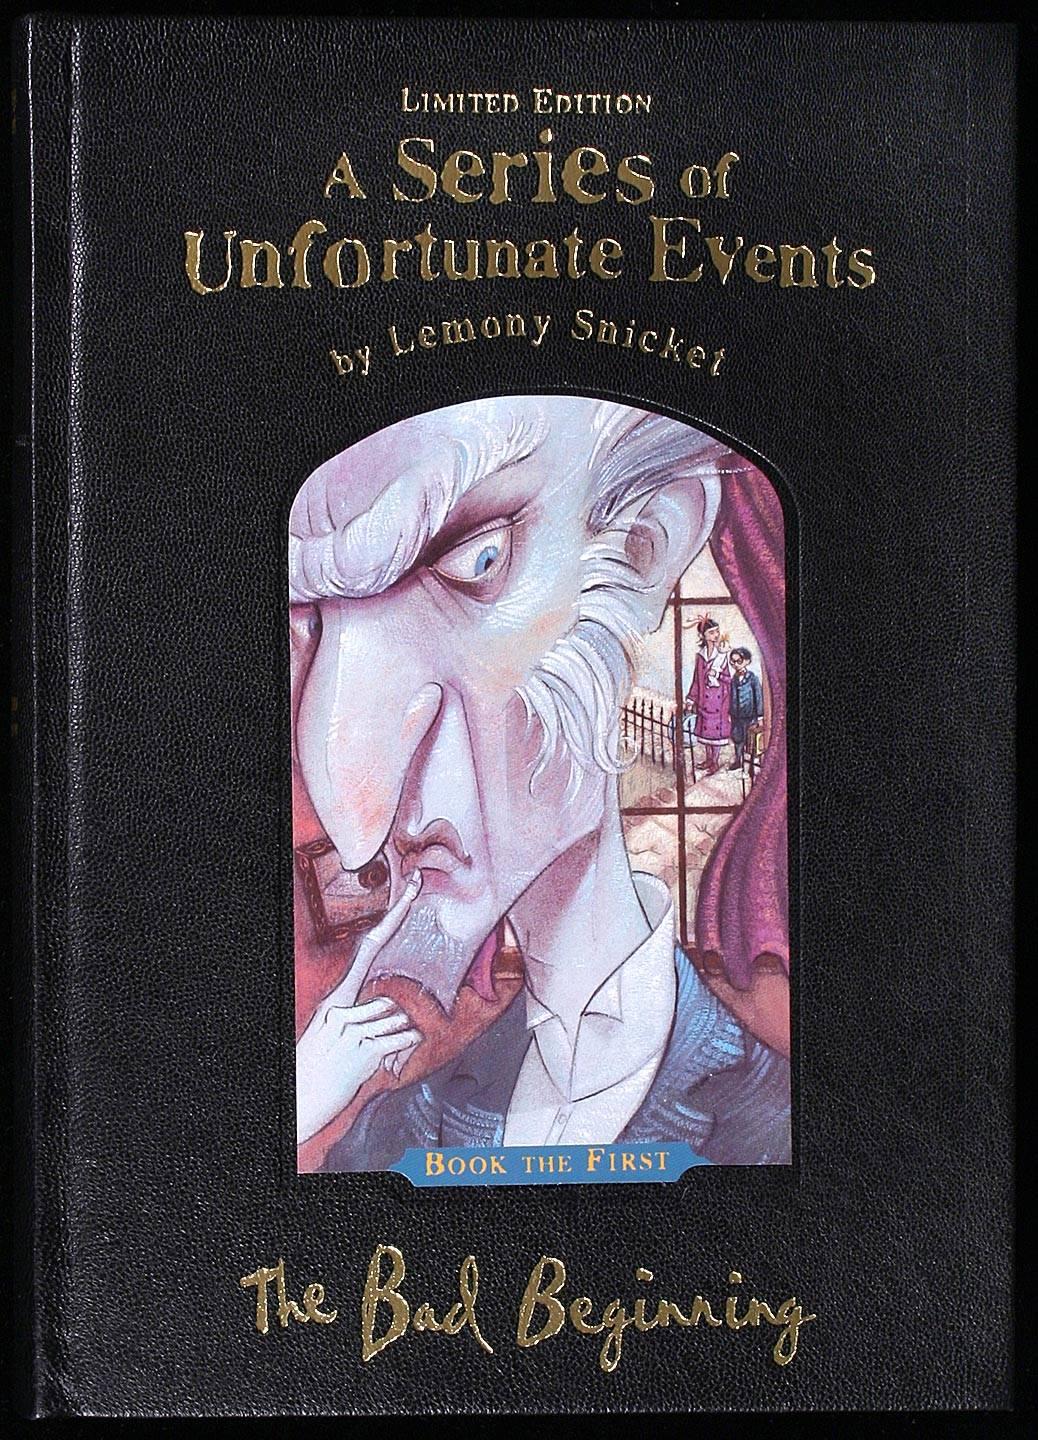 Lemony Snicket Research and Buy First Editions, Limited Editions